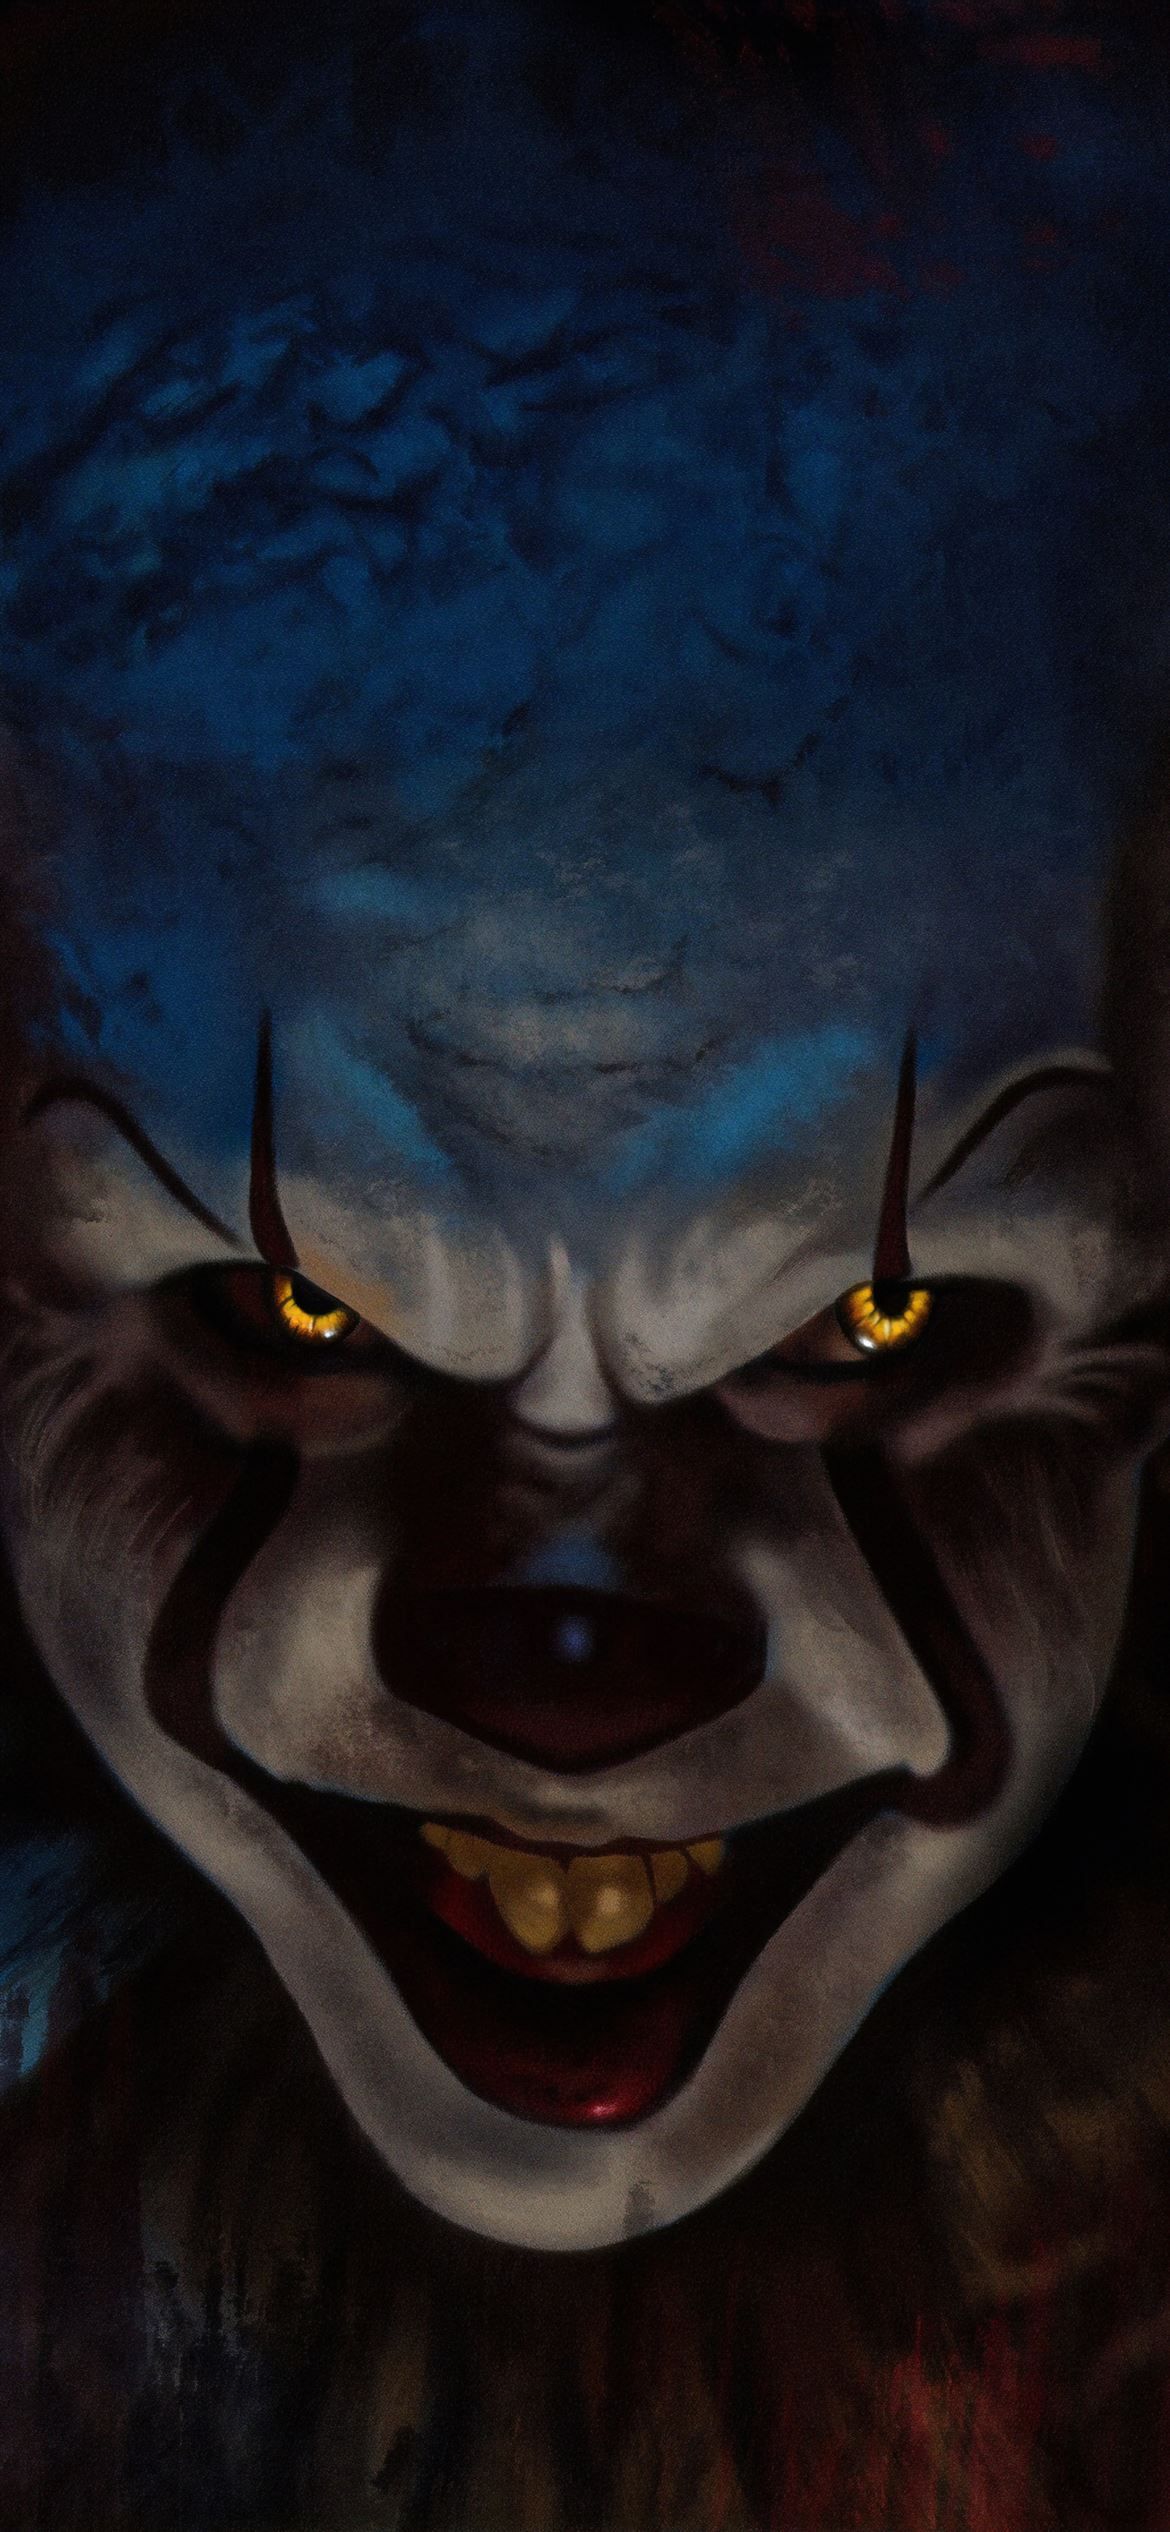 pennywise 4k 2019 iPhone 12 Wallpaper Free Download